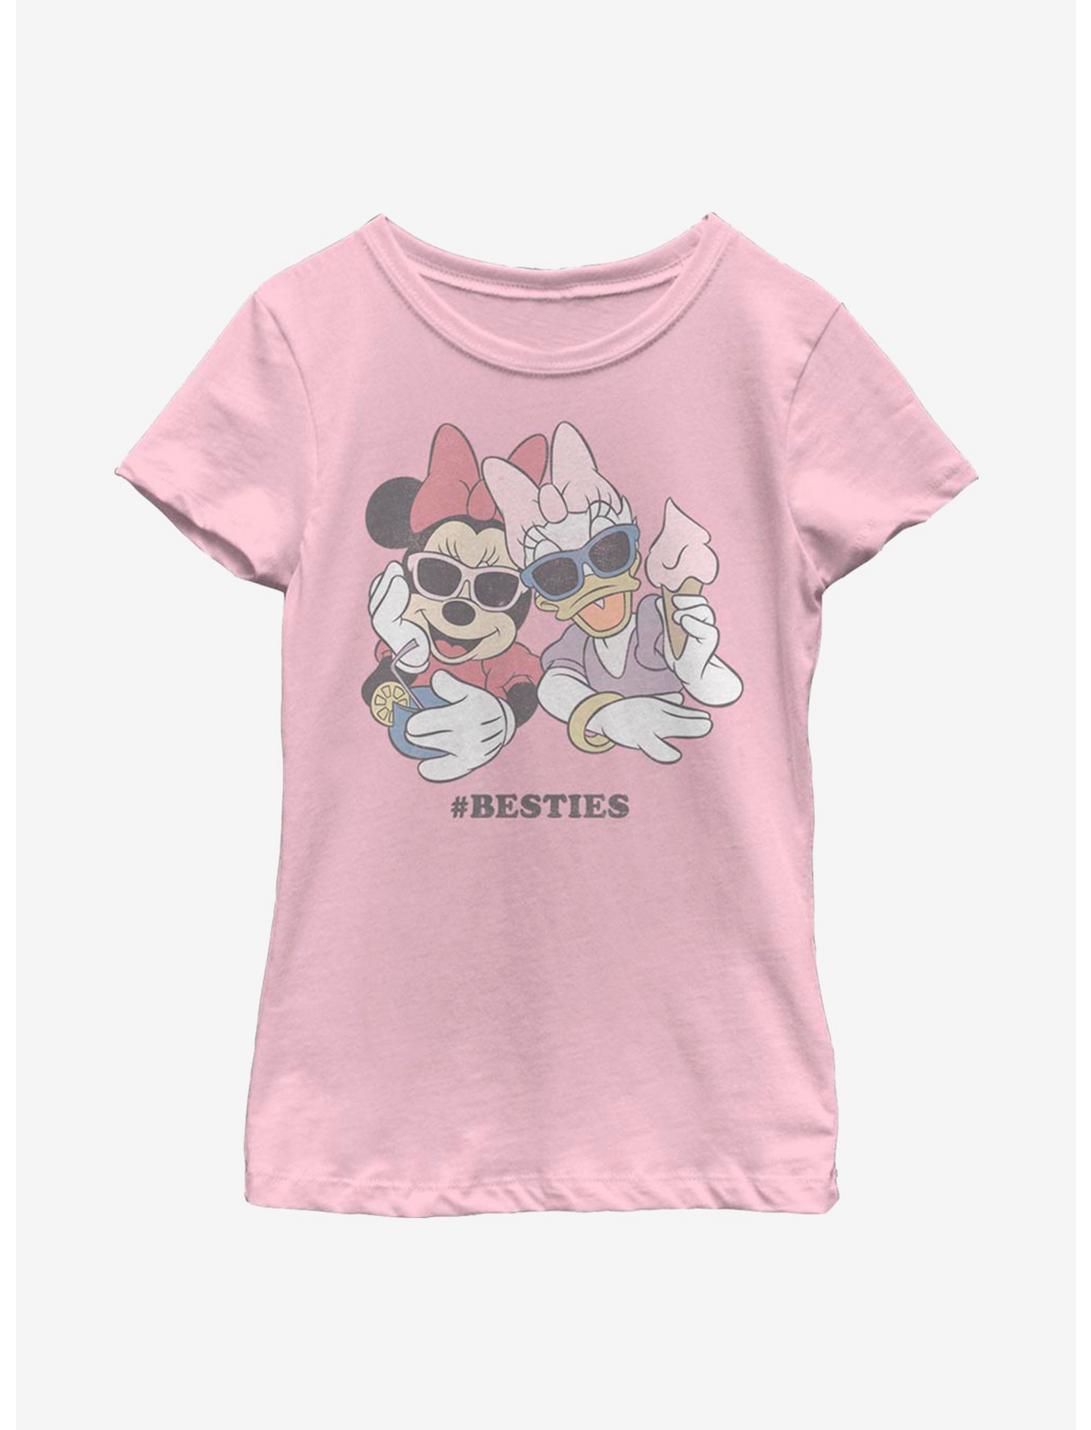 Disney Minnie Mouse Besties Youth Girls T-Shirt, PINK, hi-res